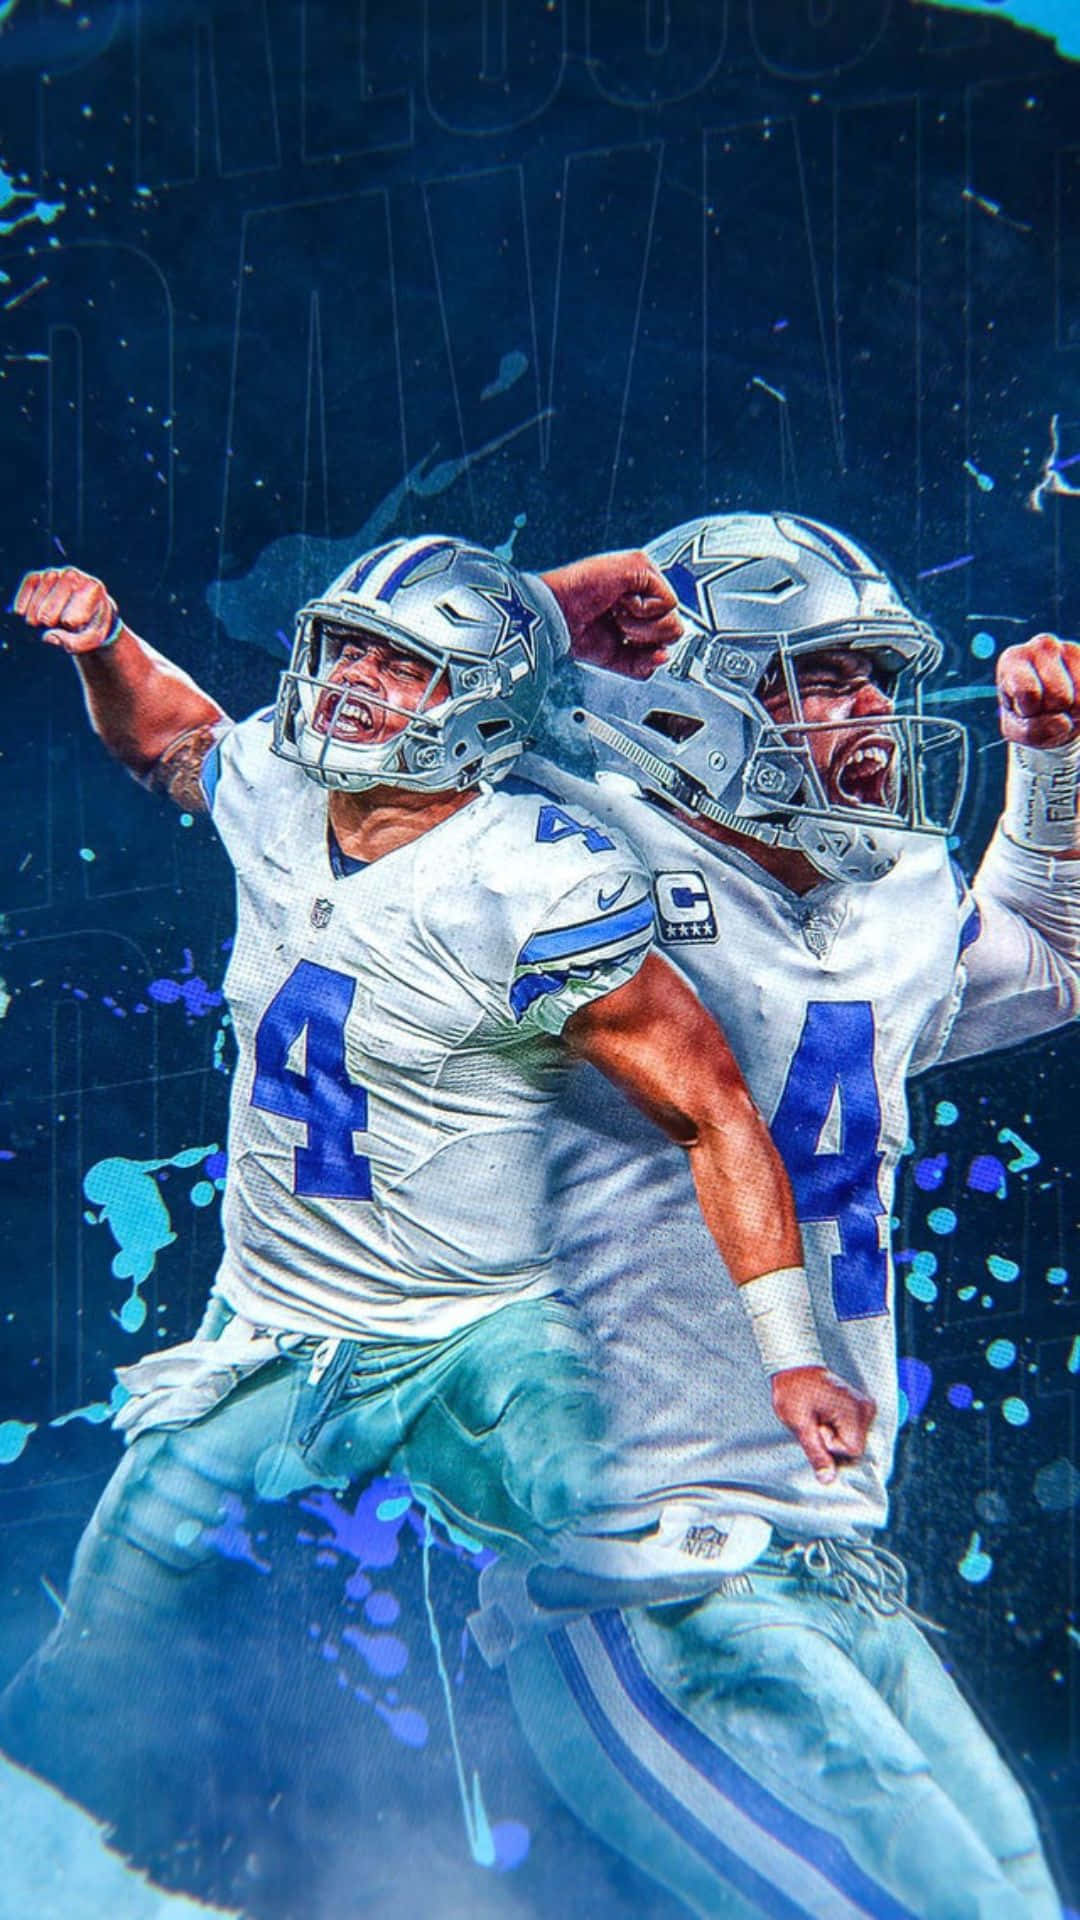 4 Dallas Cowboy's Players Celebrating After a Winning Game Wallpaper